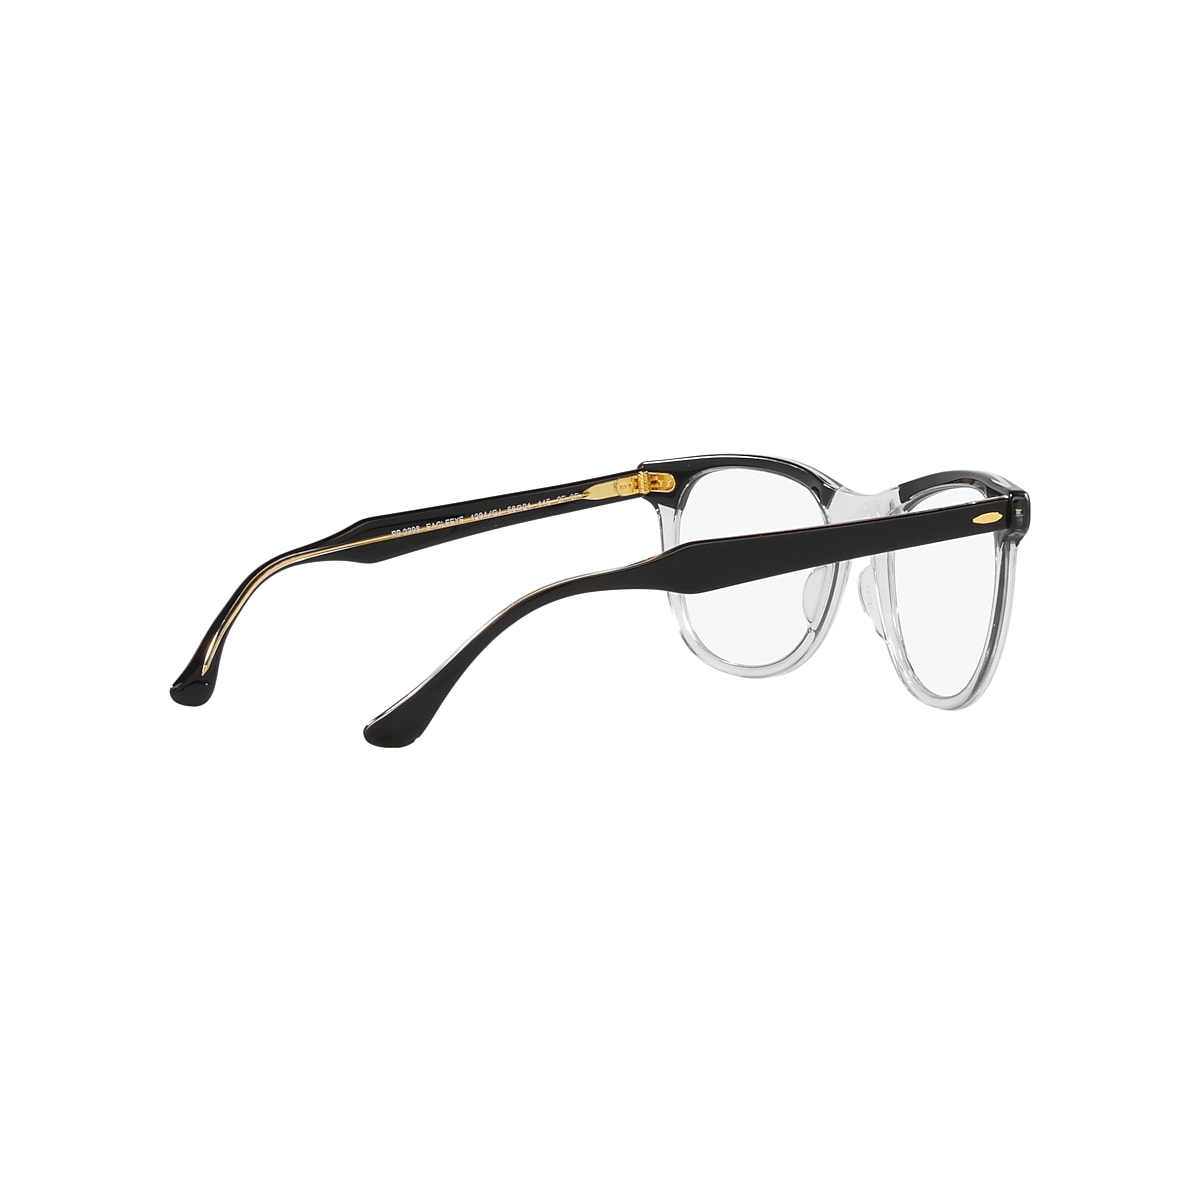 EAGLE EYE TRANSITIONS® Sunglasses in Black On Transparent and